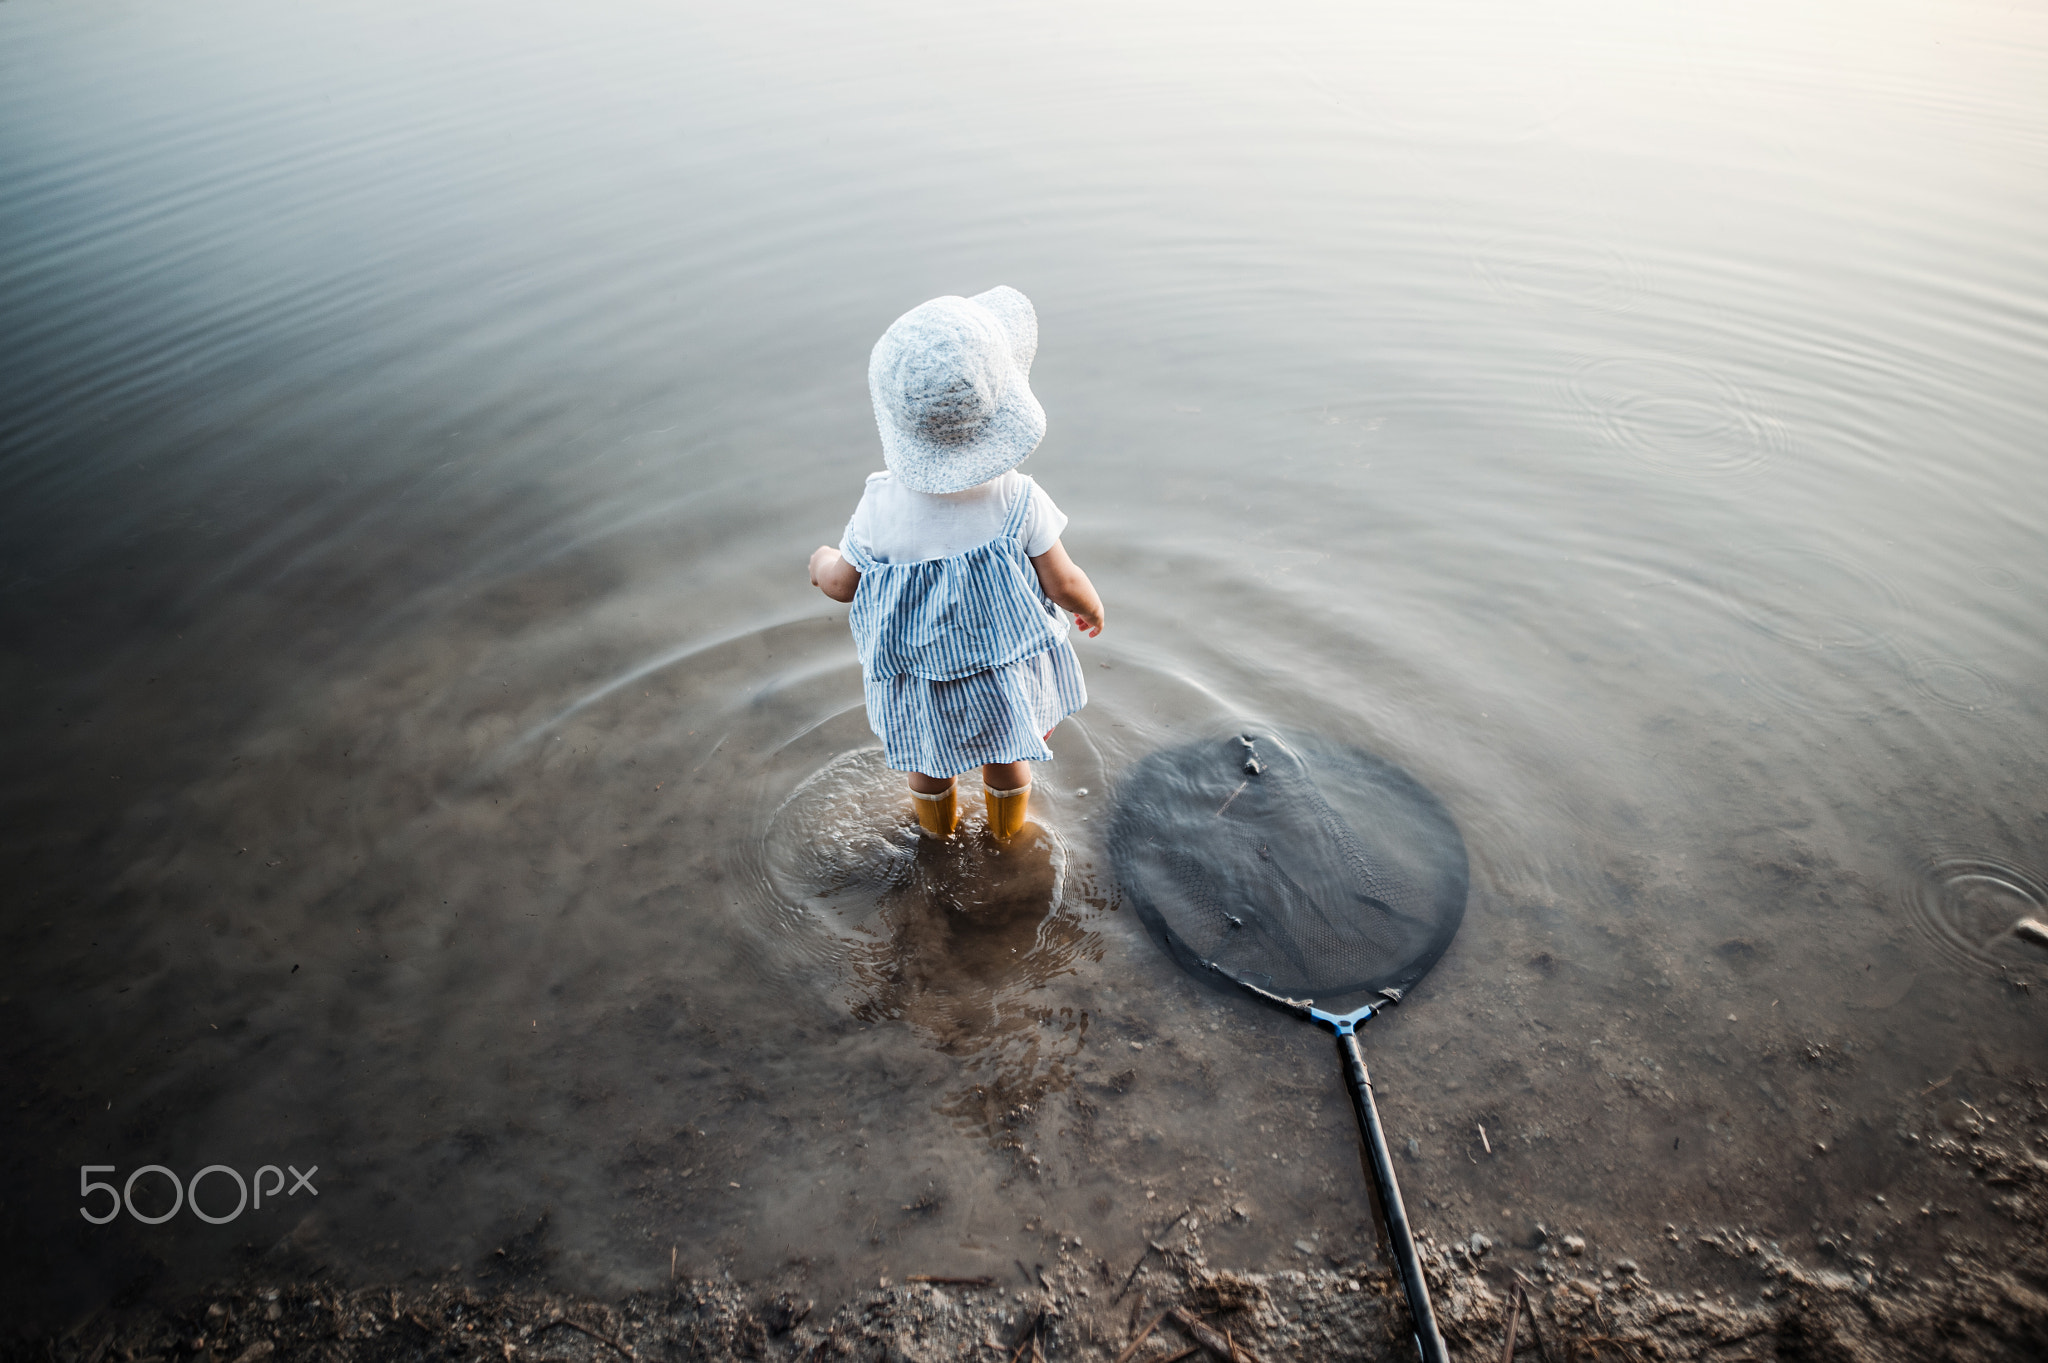 A rear view of small toddler girl standing in water in a lake, a fishing net next to her.